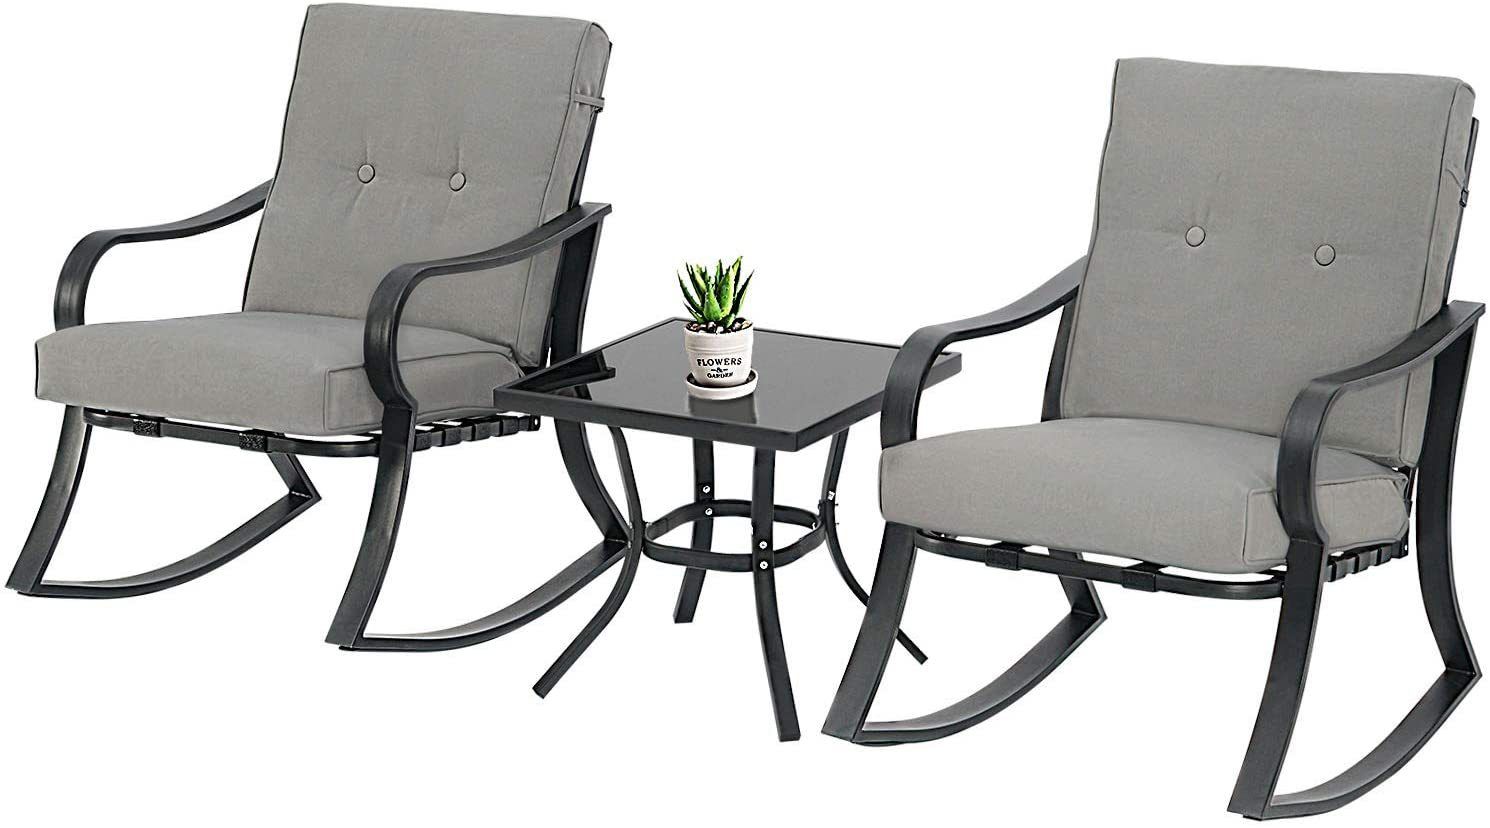 Classic Brands 3 Piece Outdoor Rocking Chairs Bistro Set Black Steel With Gray Wash Wood Porch Patio Chairs Sets (View 4 of 15)